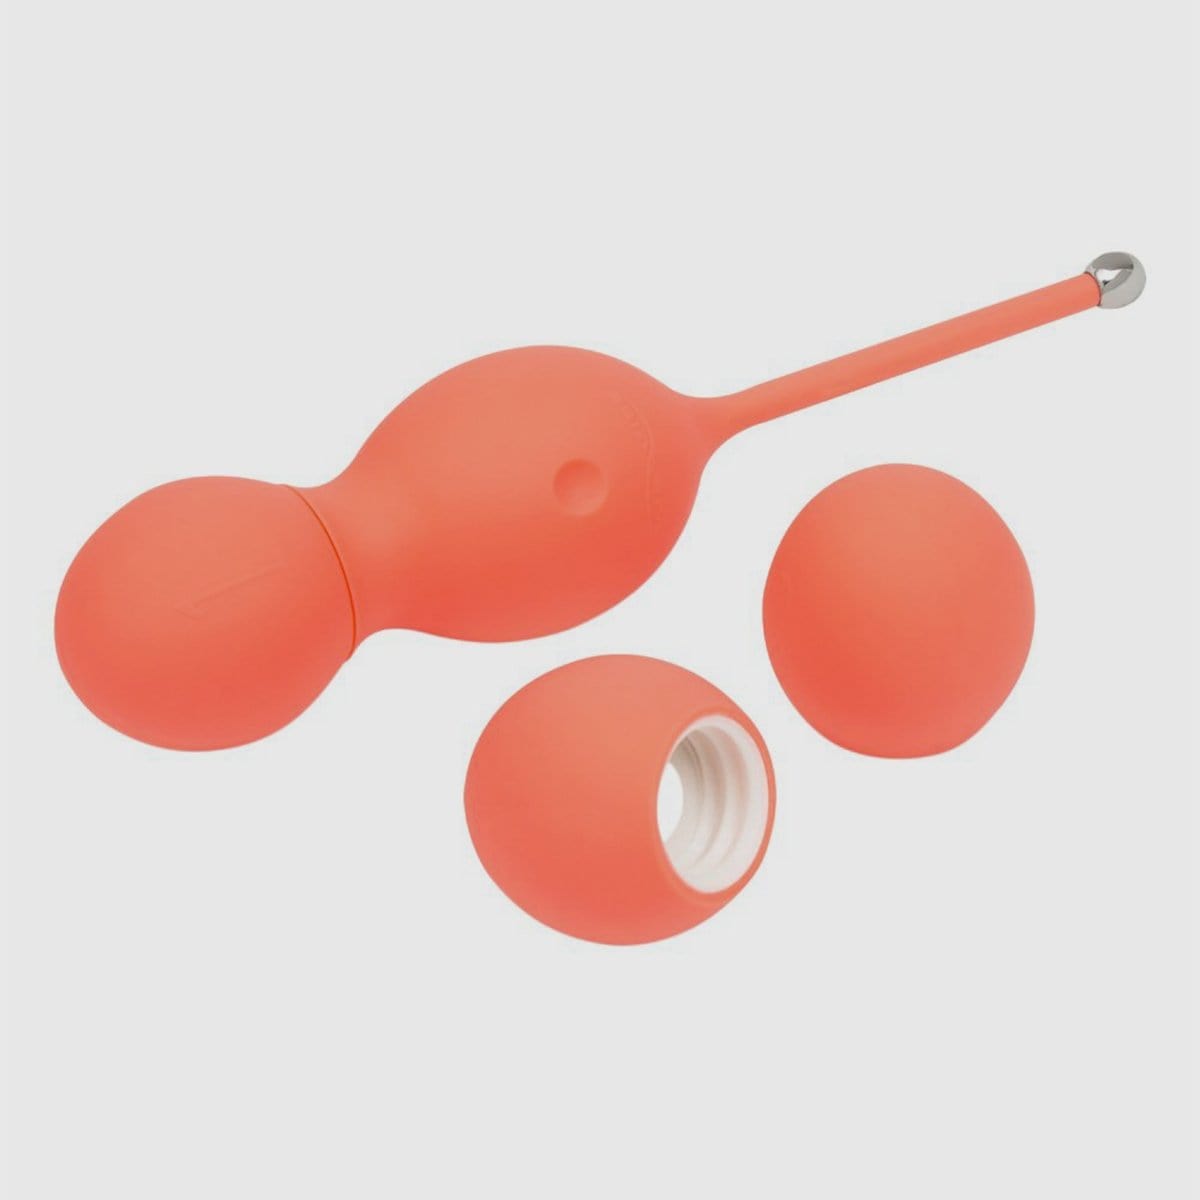 Bloom by We-Vibe Vibrating Kegel Balls - Coral - Thorn & Feather